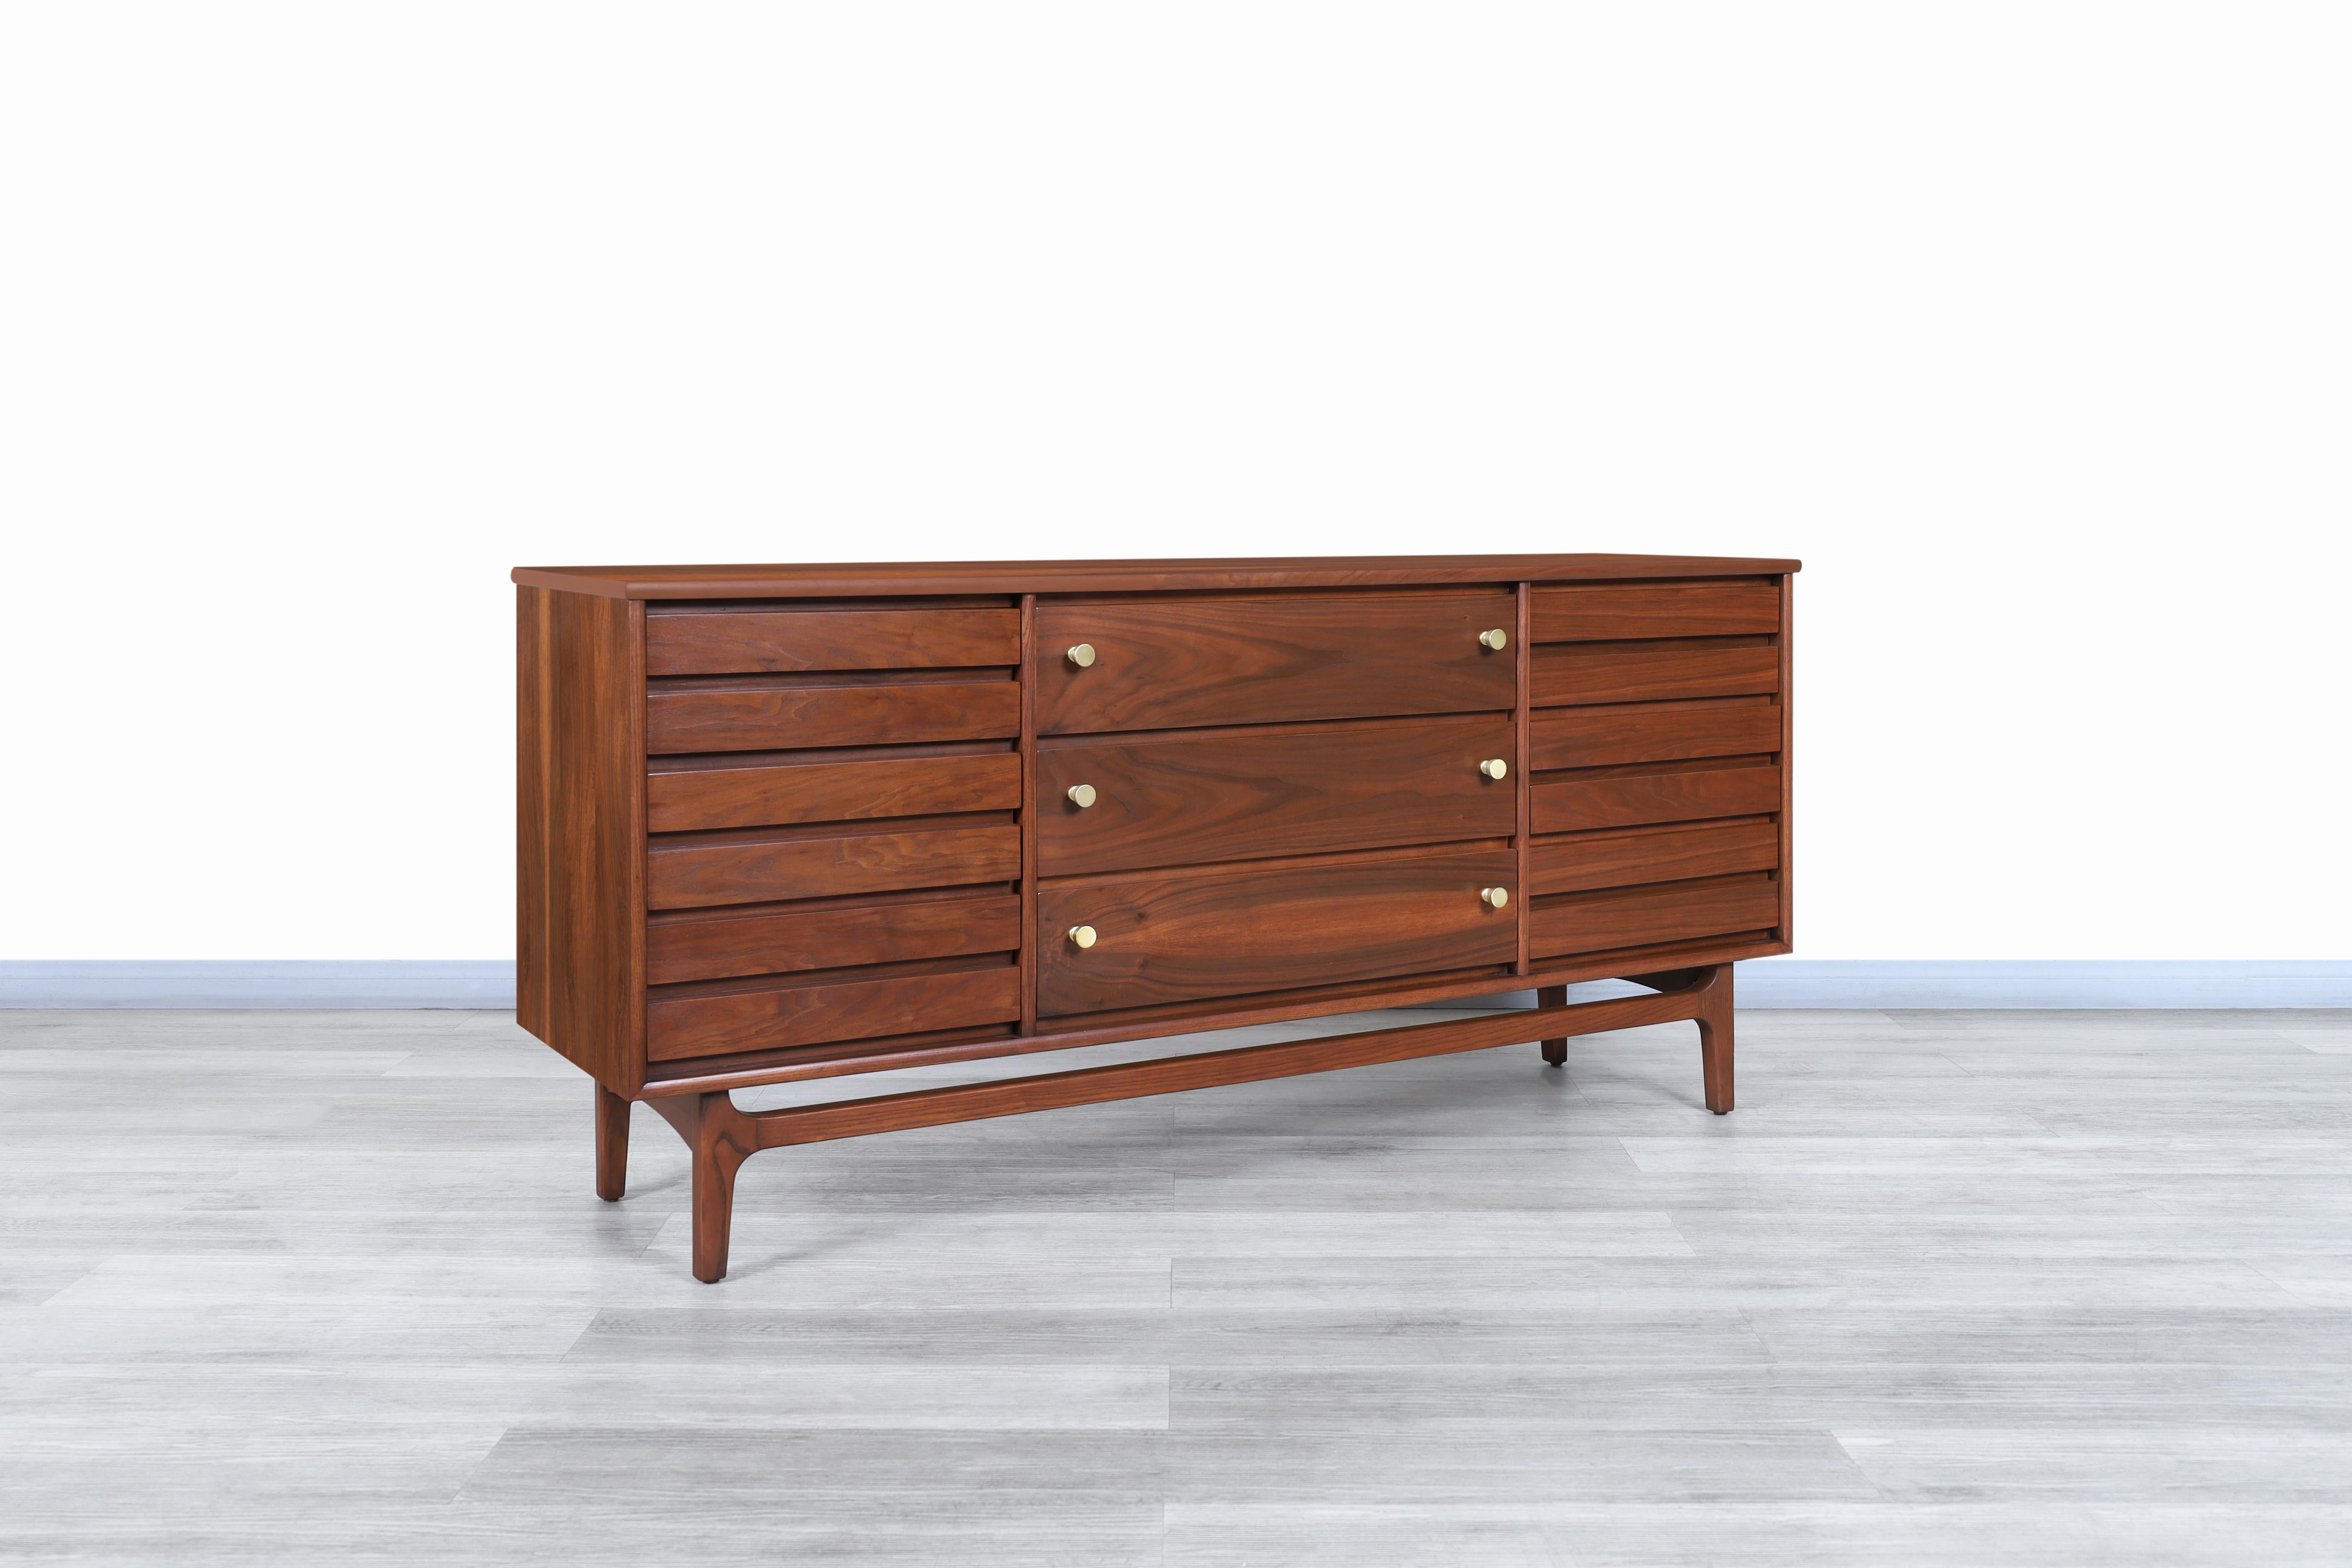 Exceptional Mid-Century Modern walnut dresser designed and manufactured by Stanley Furniture in the United States, circa 1960s. This dresser has been constructed from the highest quality walnut wood and features a conservative yet highly functional